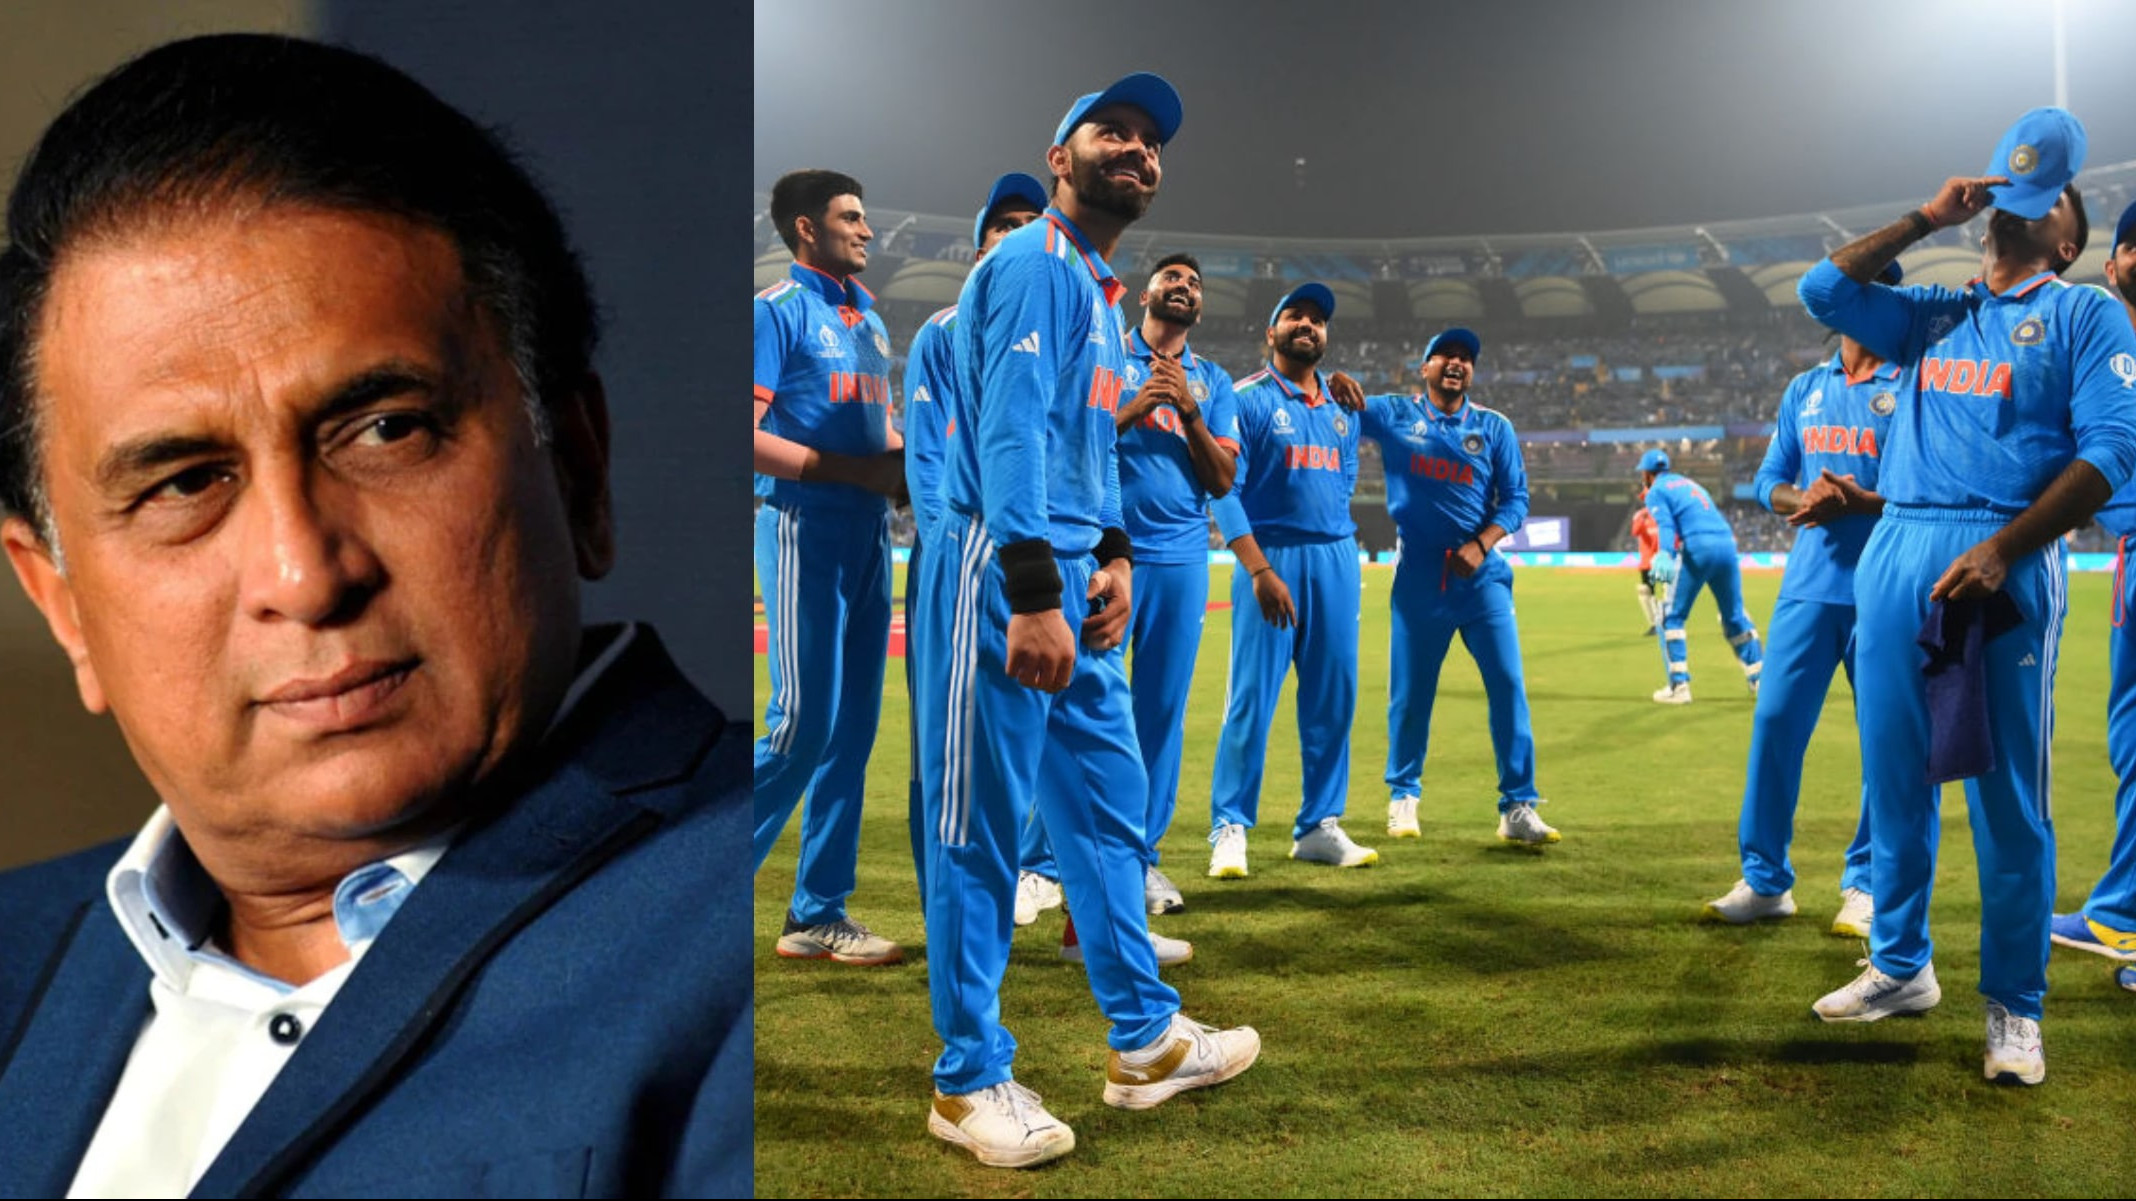 “India not winning T20 World Cup after 2007 huge disappointment”- Gavaskar urges India to make tough decisions